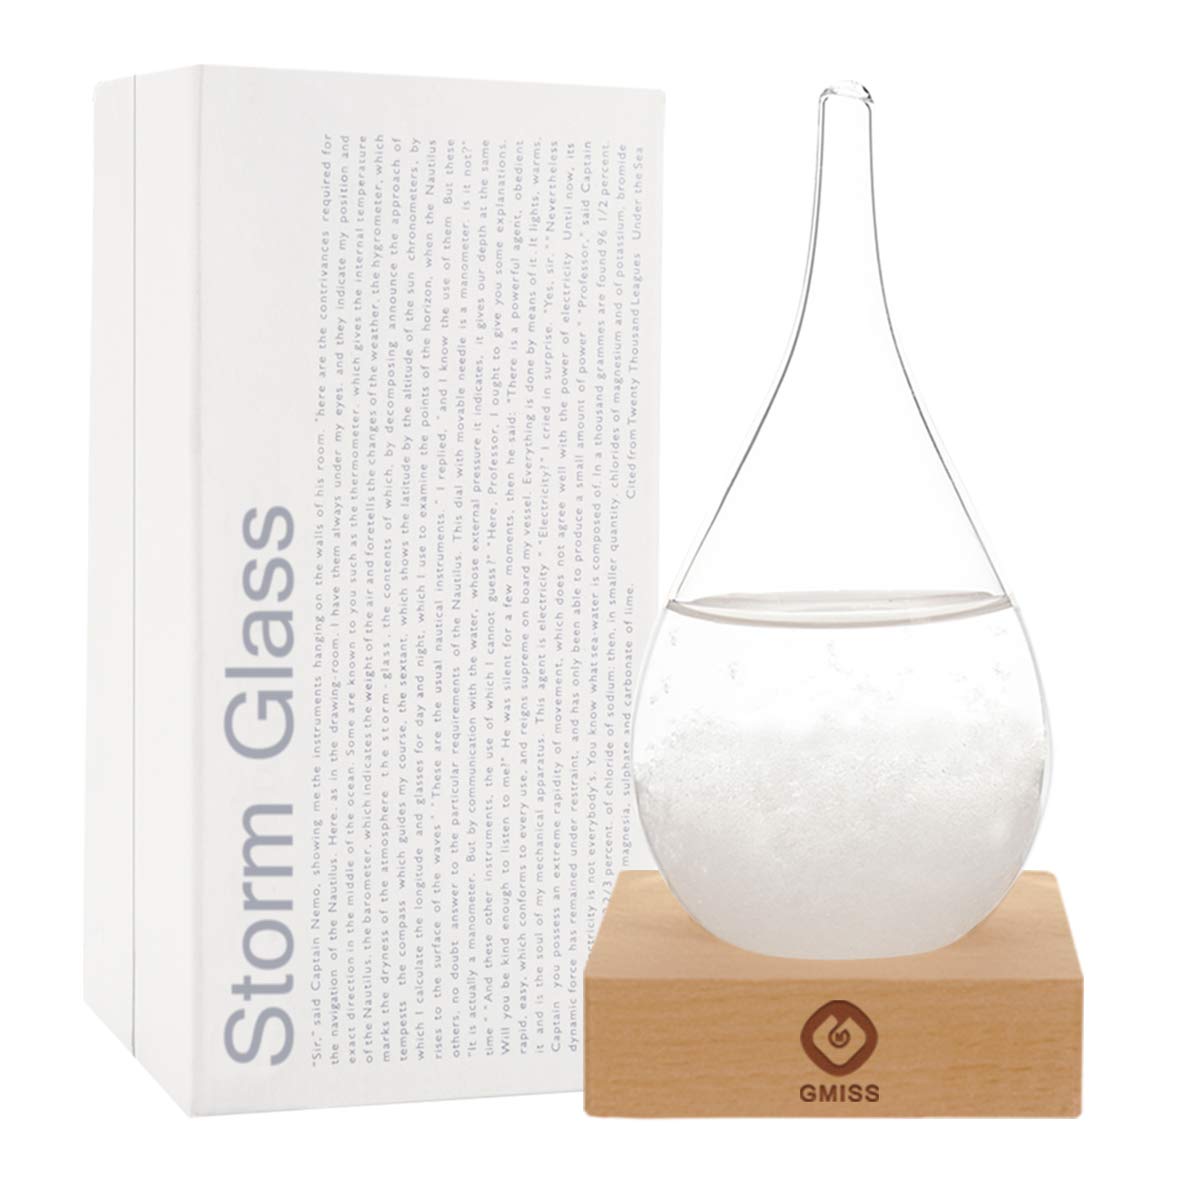 A storm glass weather predictor.